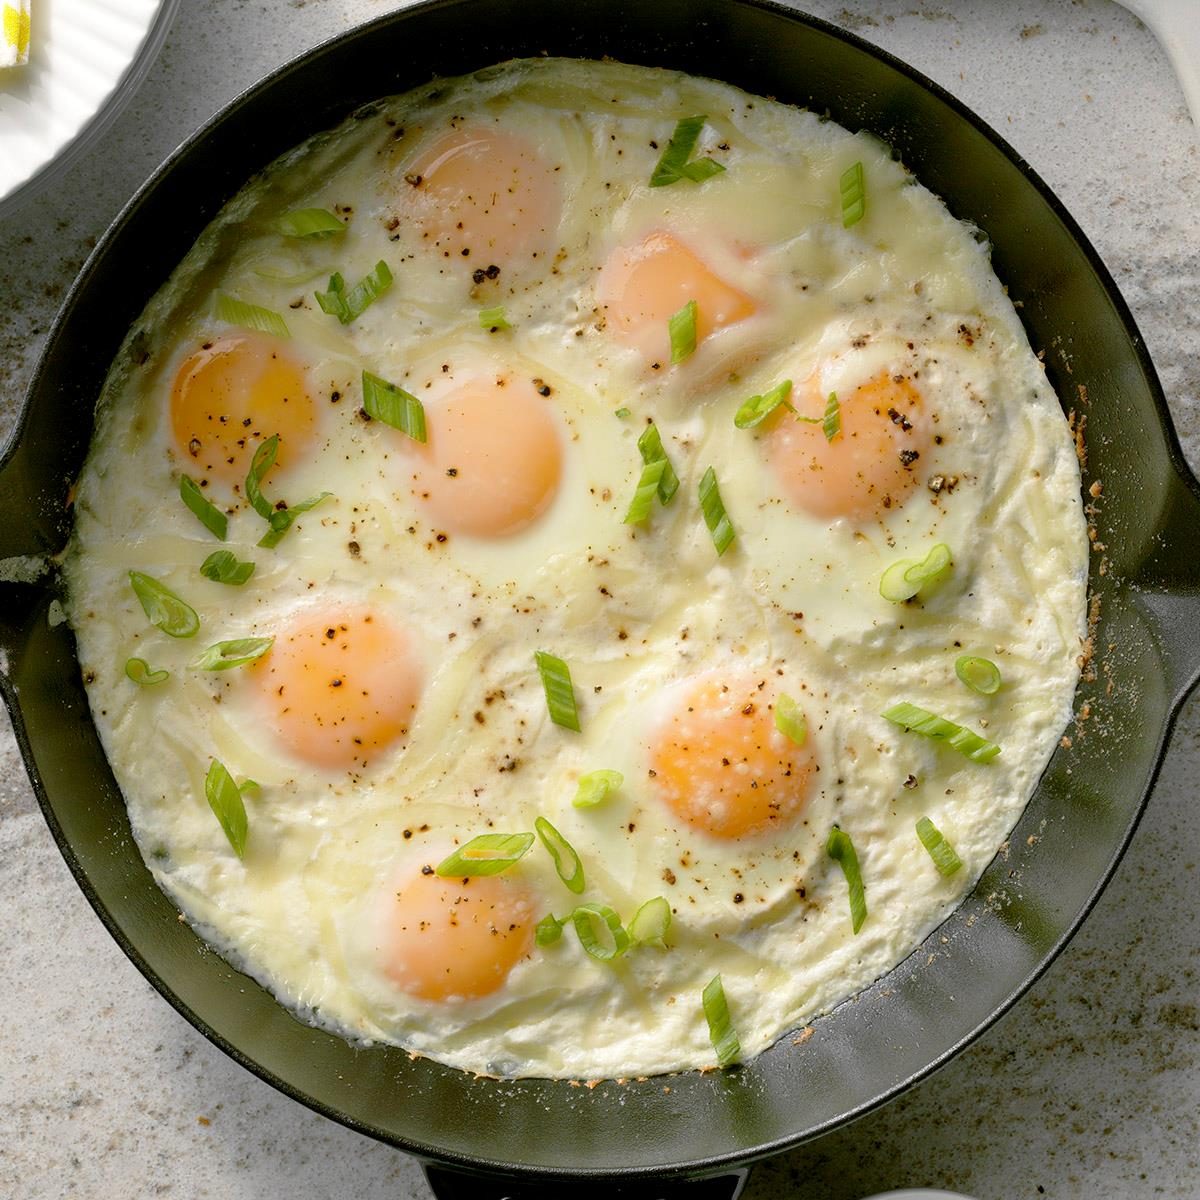 Arkansas: Creamy Baked Eggs with Chives